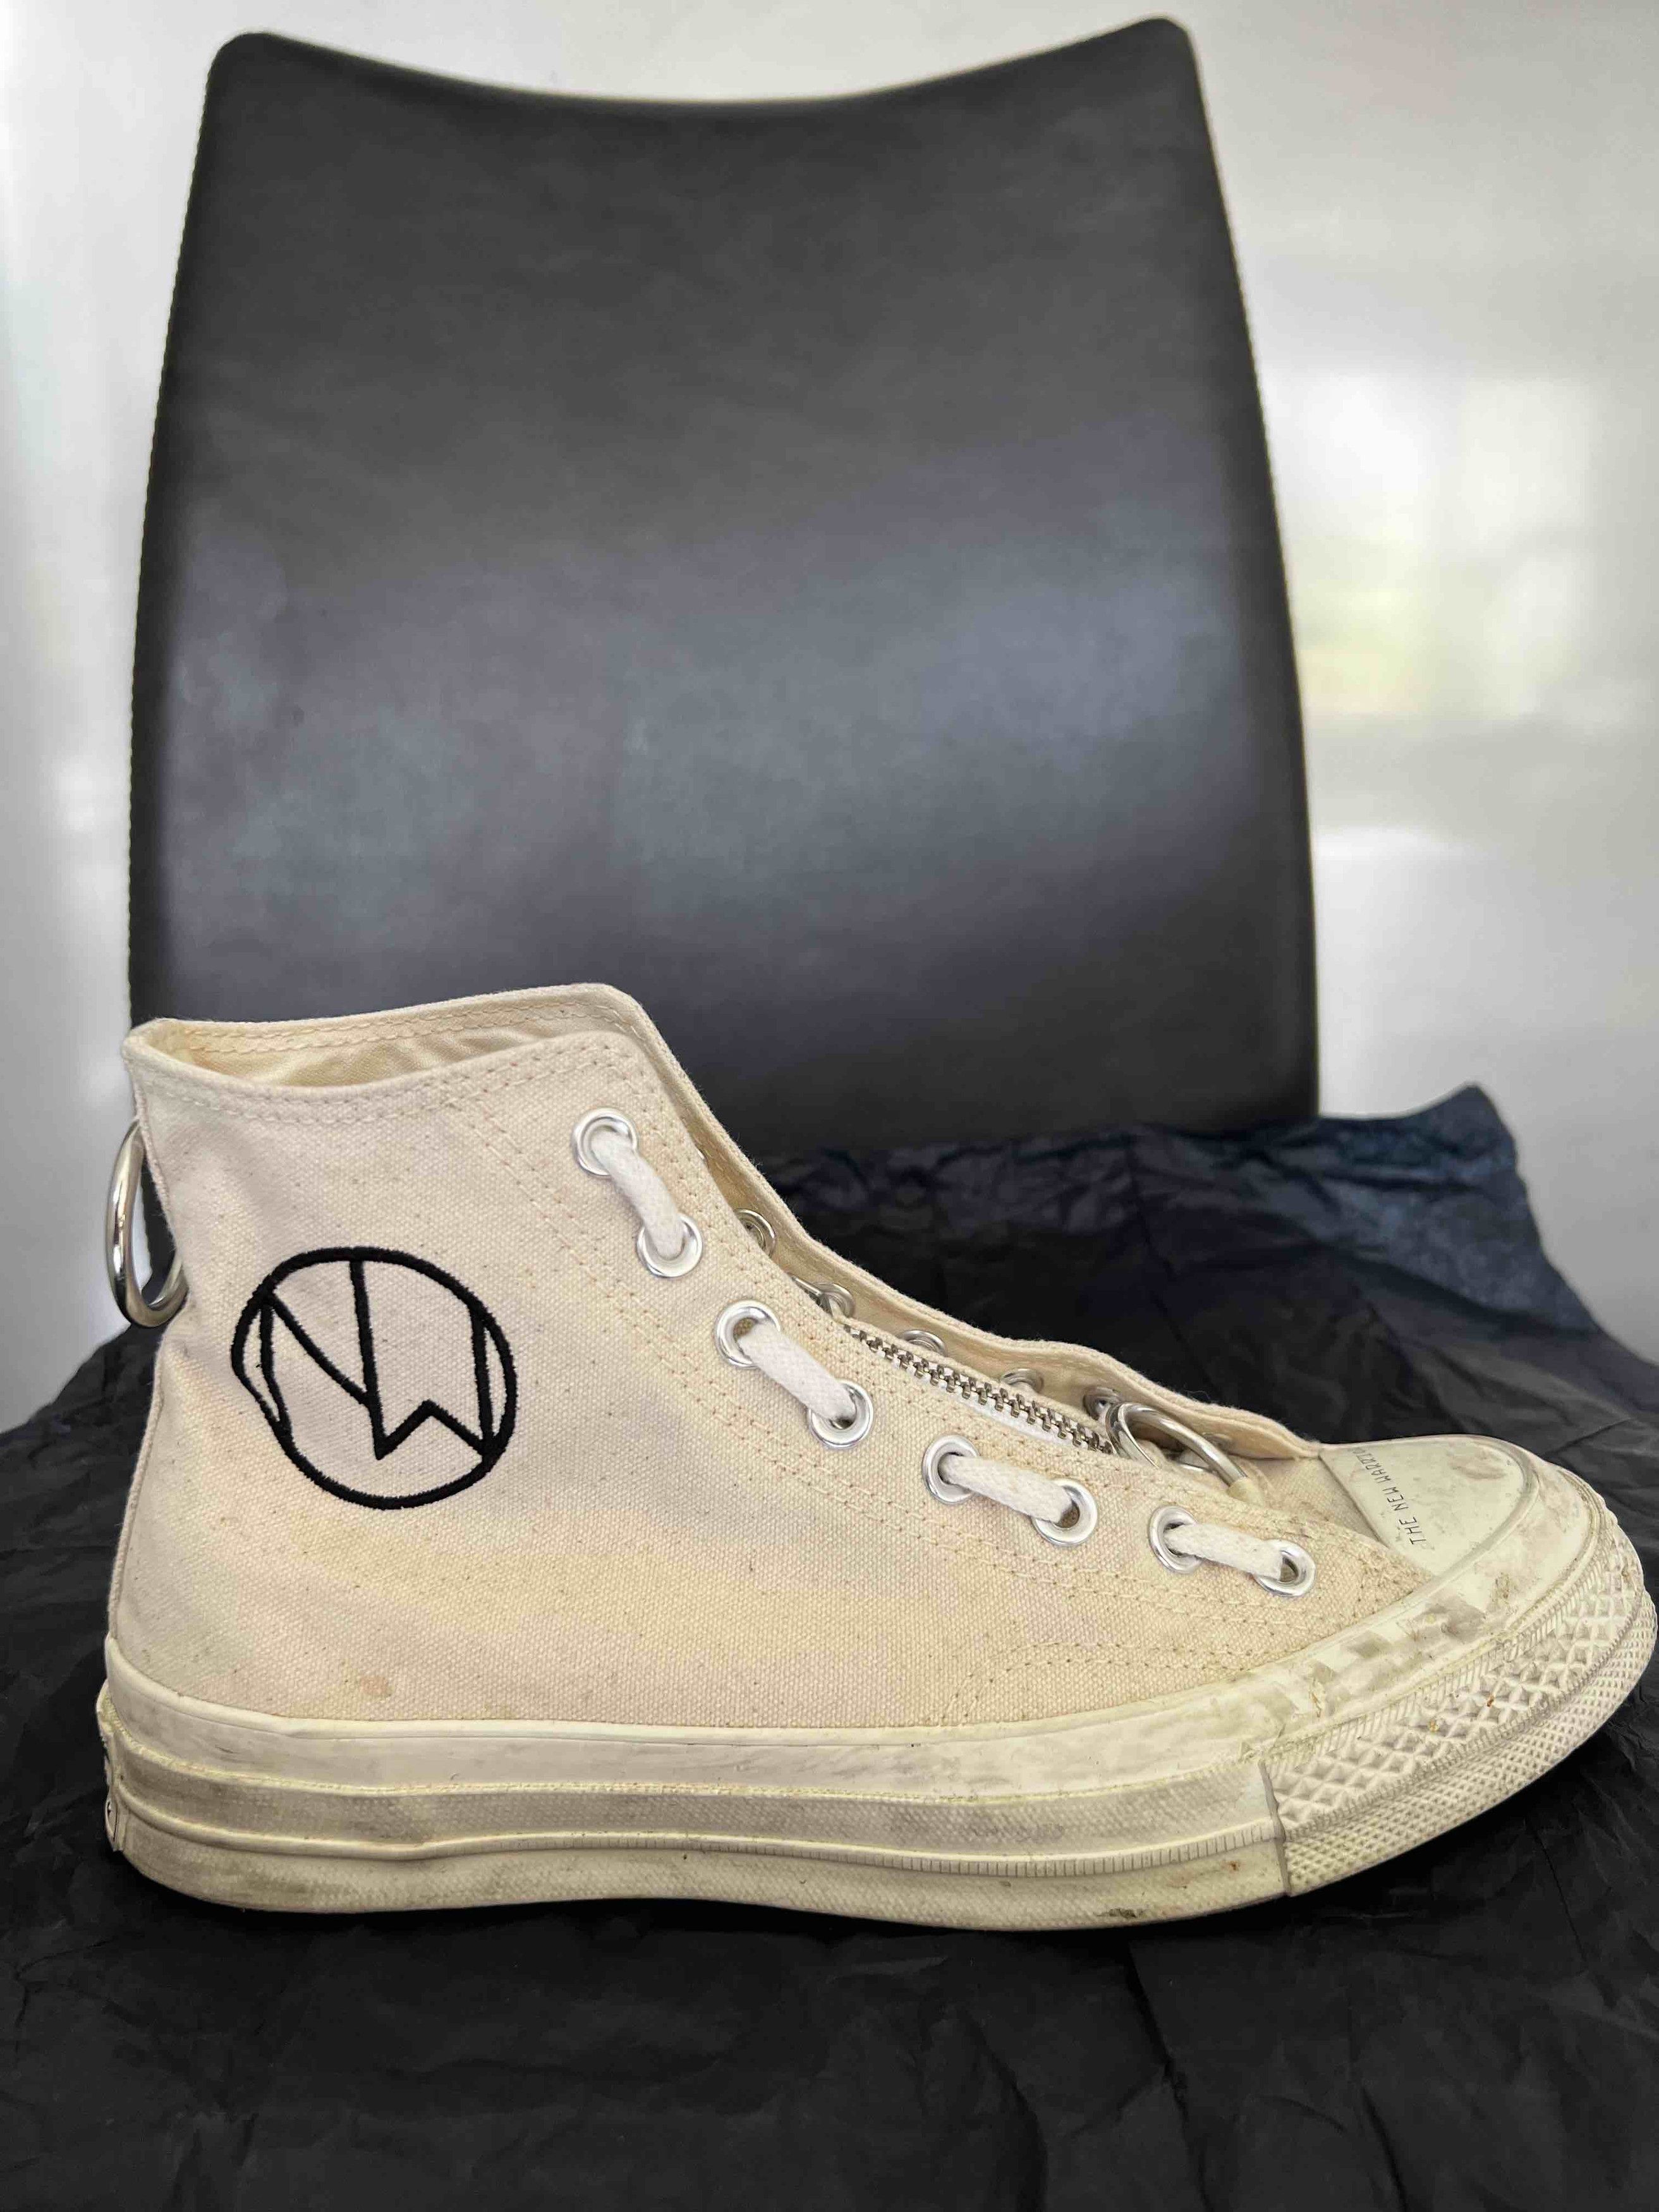 Undercover Undercover Converse Chuck Taylor All-Star 70 Hi | Grailed